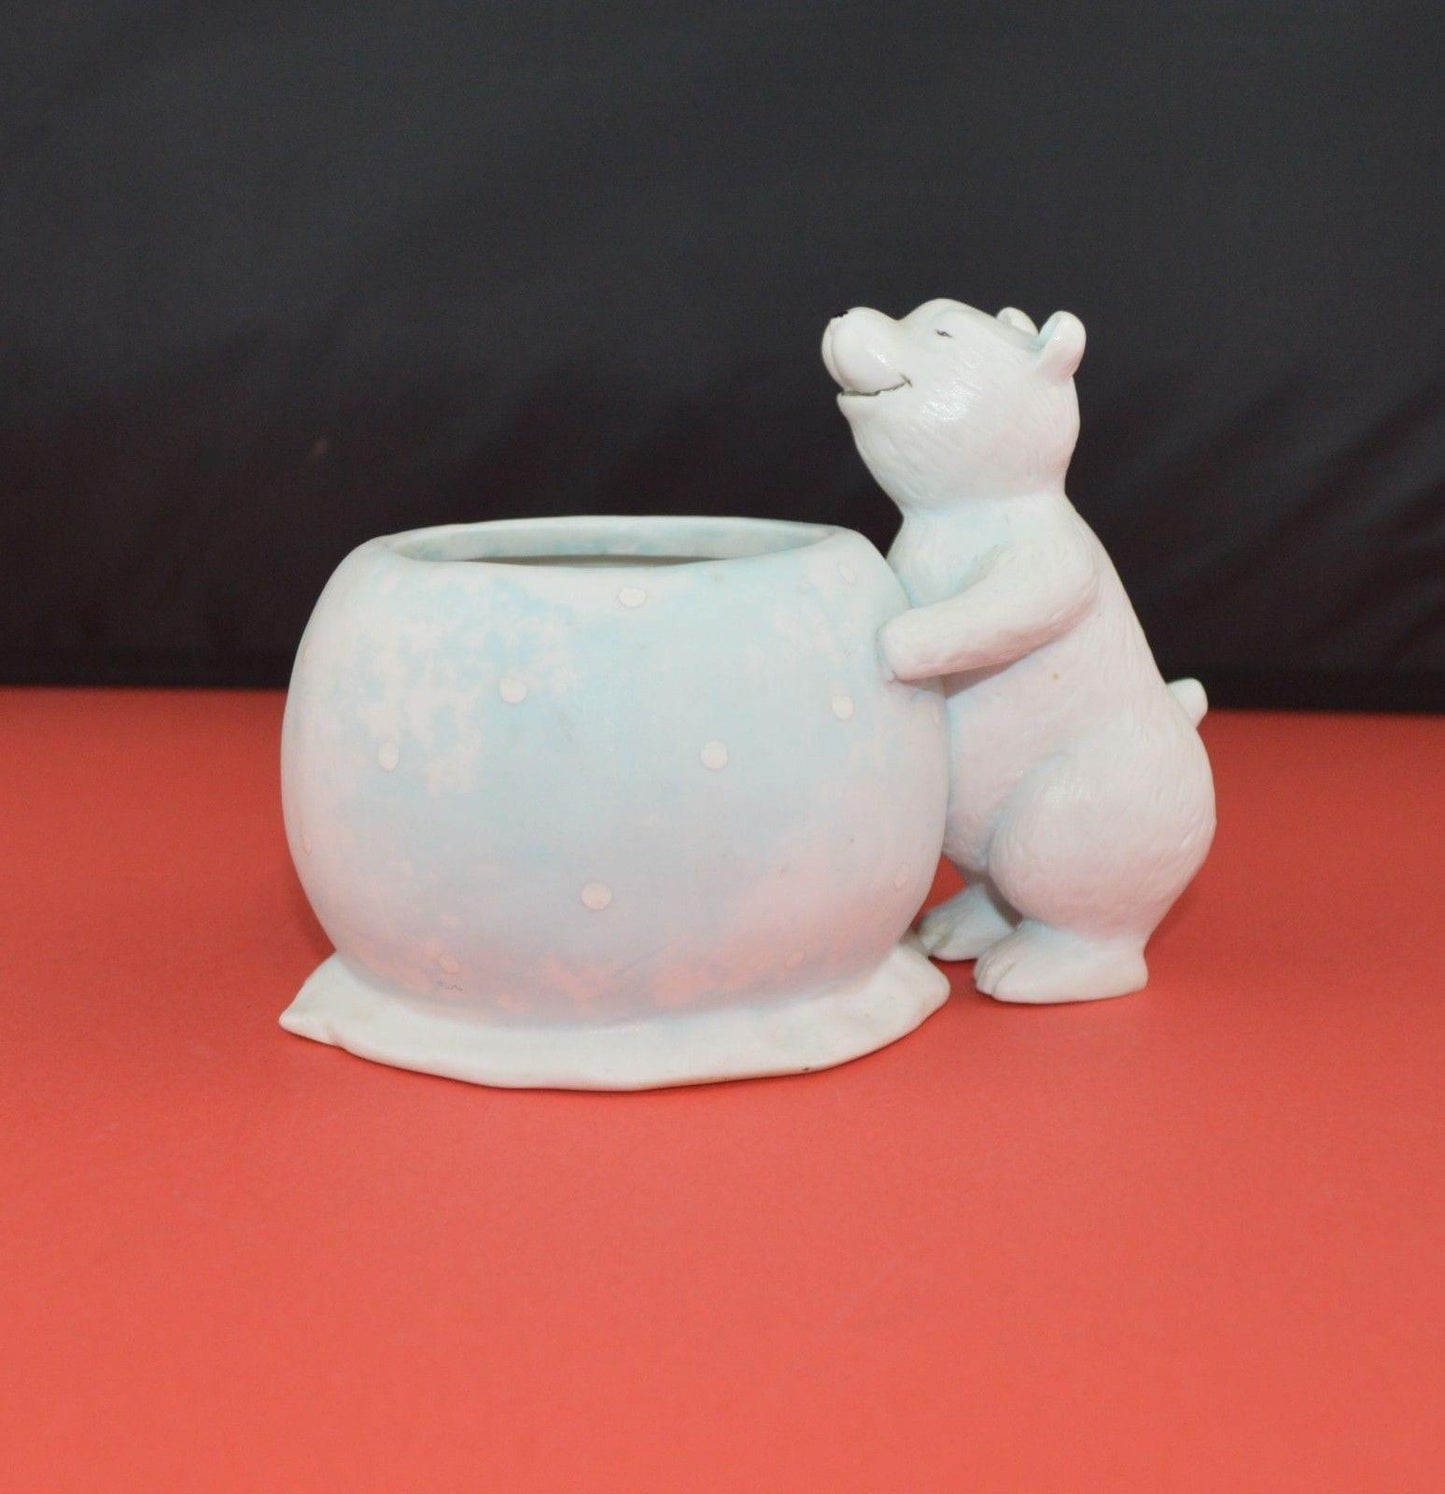 THREE POTTERY PLANTERS ONE WHITE ONE FLORAL ONE WITH A POLAR BEAR(PREVIOUSLY OWNED) GOOD CONDITION - TMD167207